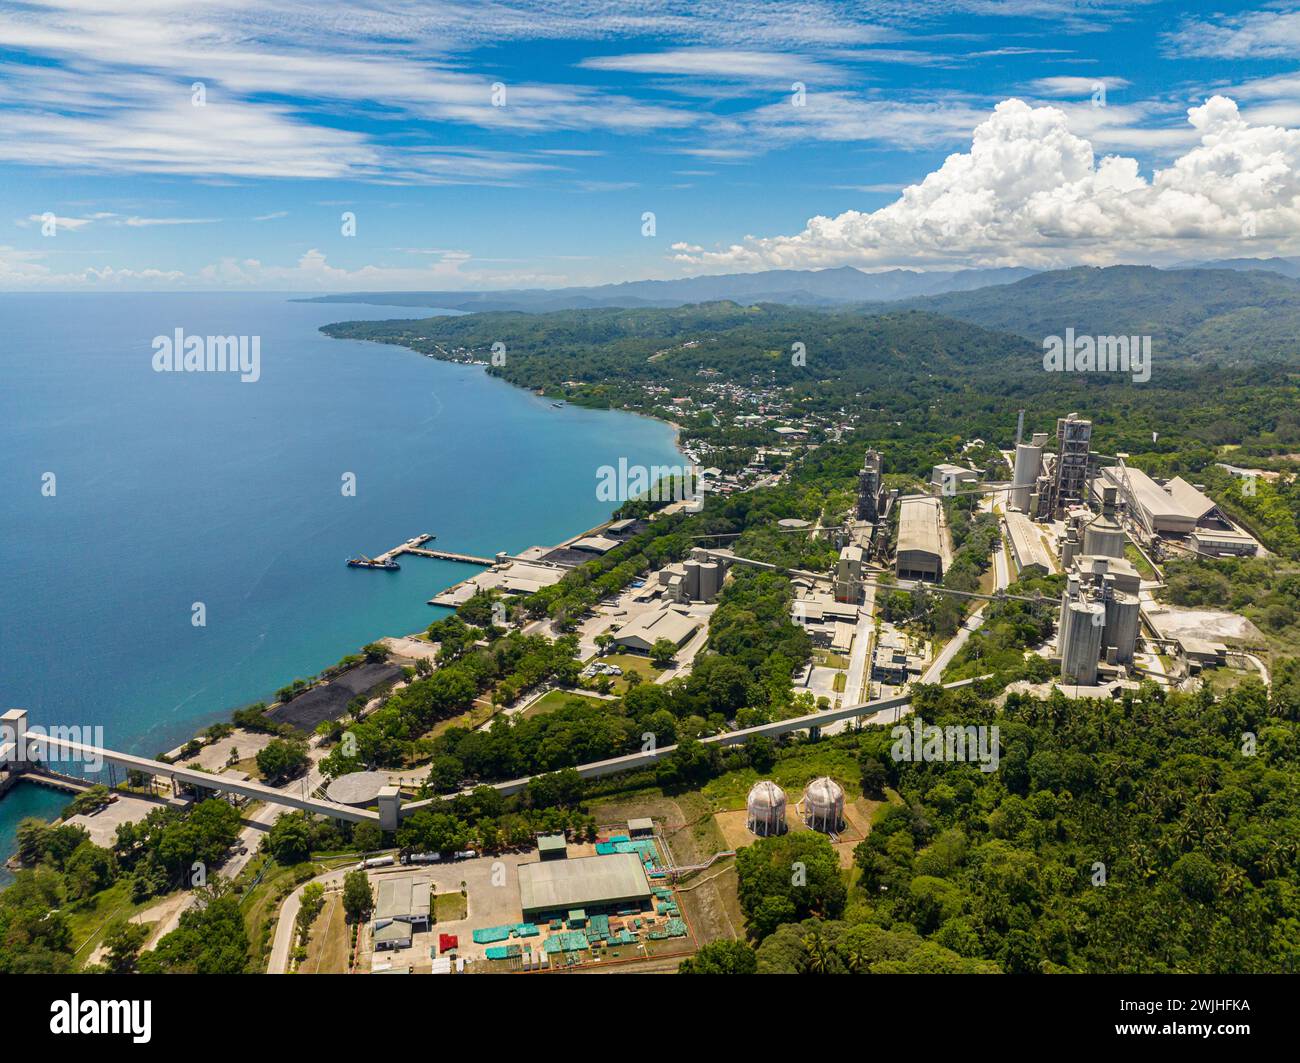 Seafront with Cement factory in Lugait, Misamis Oriental. Mindanao, Philippines. Stock Photo